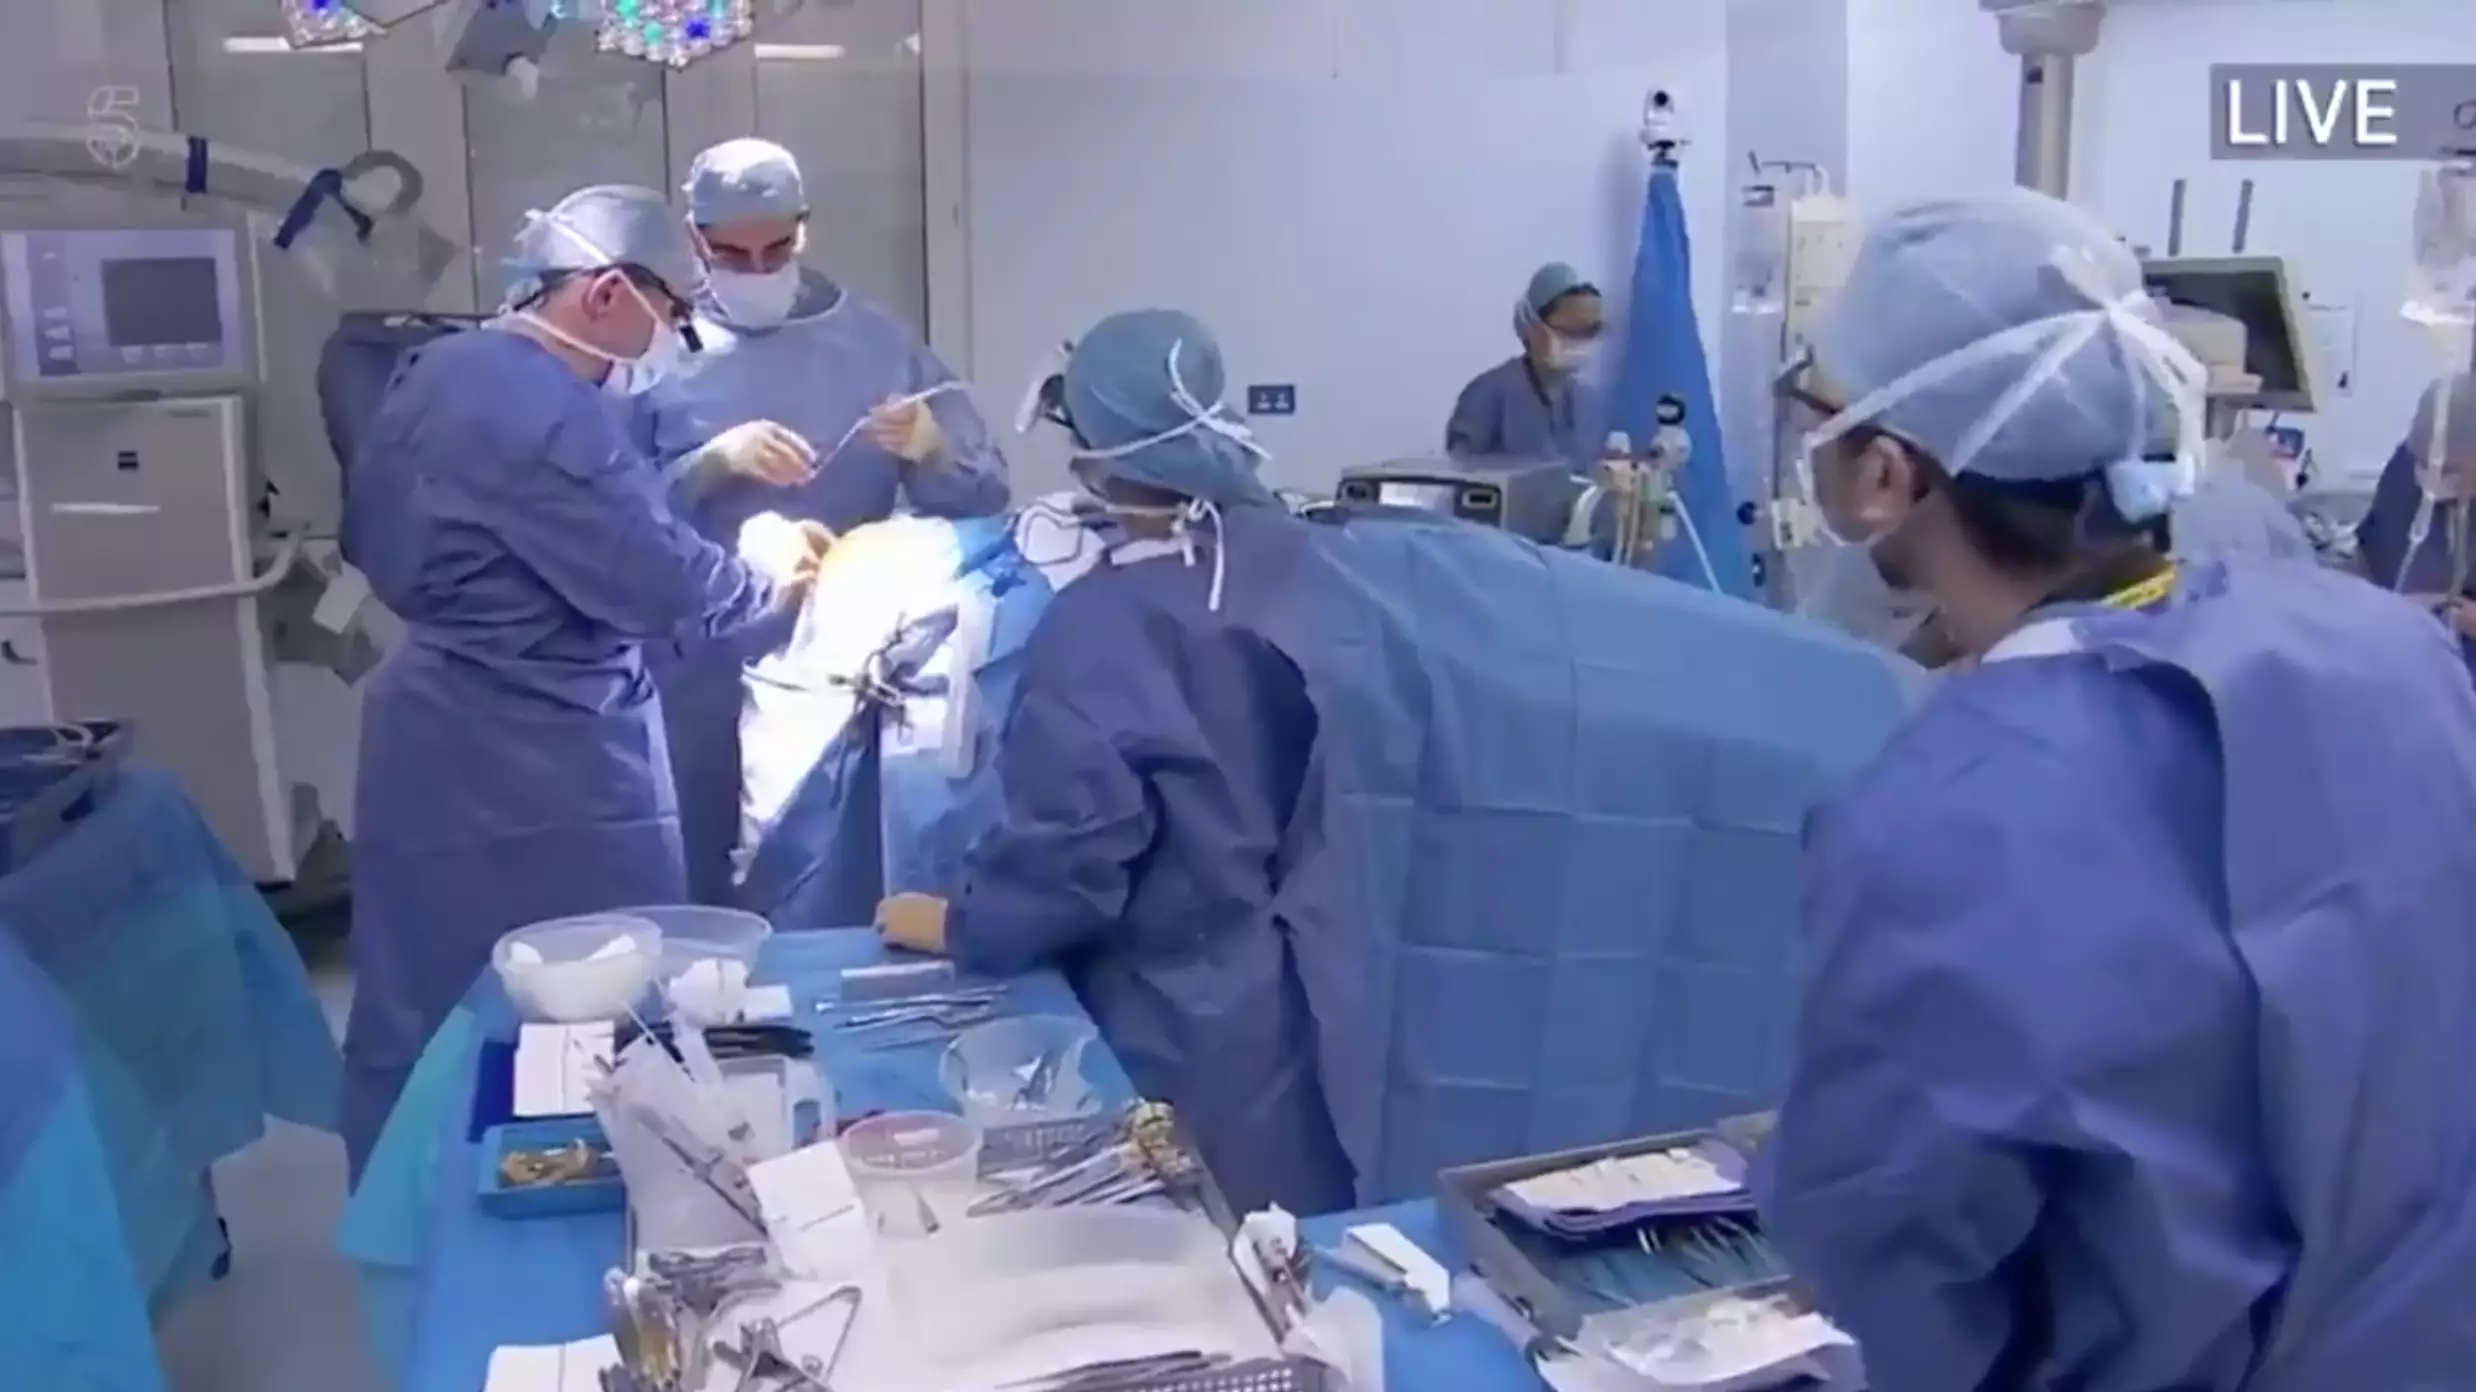 Surgeons Perform Incredible Operation On Human Brain On Live TV